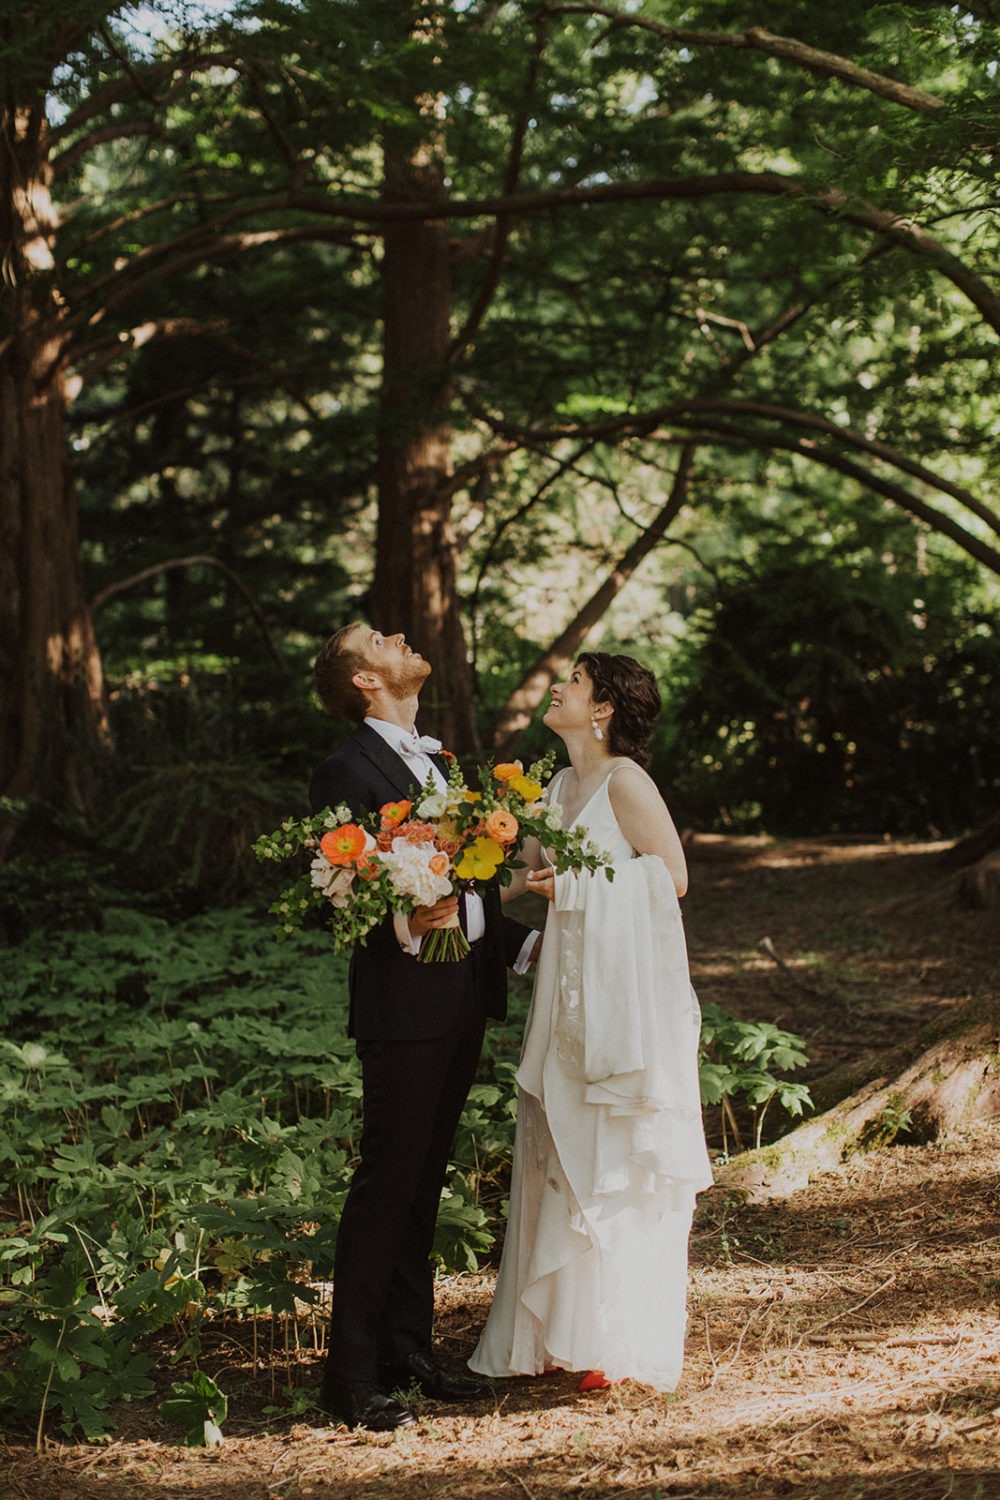 wedding couple looks up at trees holding bouquet at garden wedding